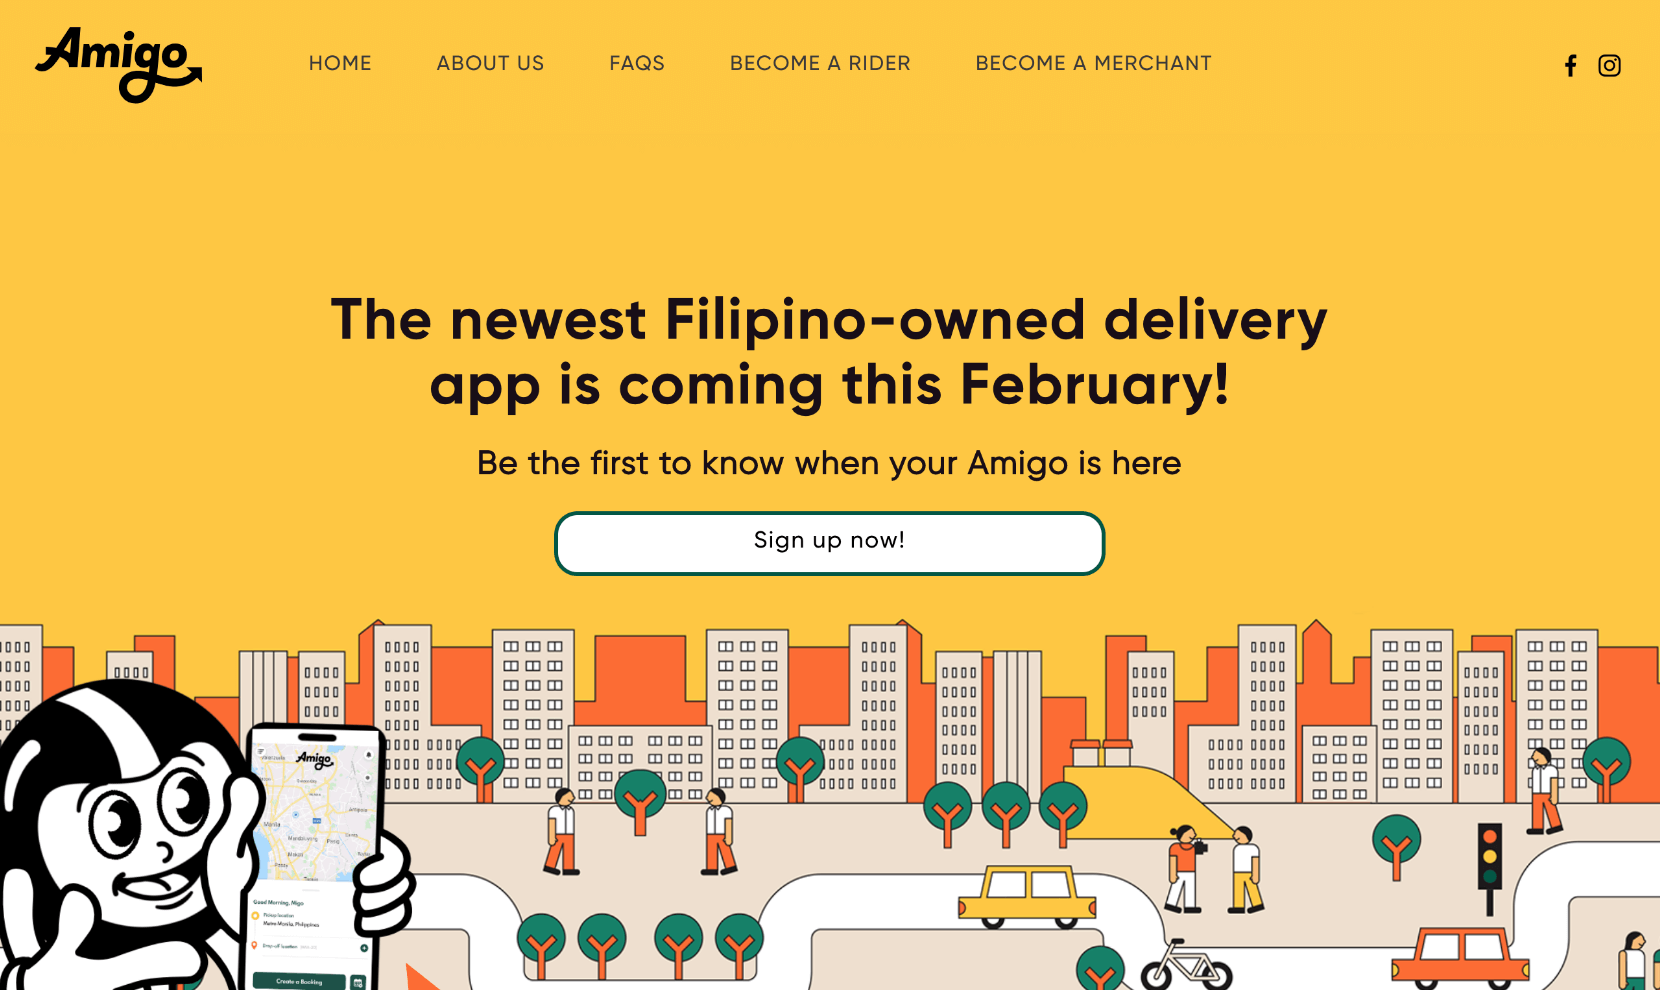 amigo-an-on-demand-delivery-service-plans-to-release-an-app-in-february-2021